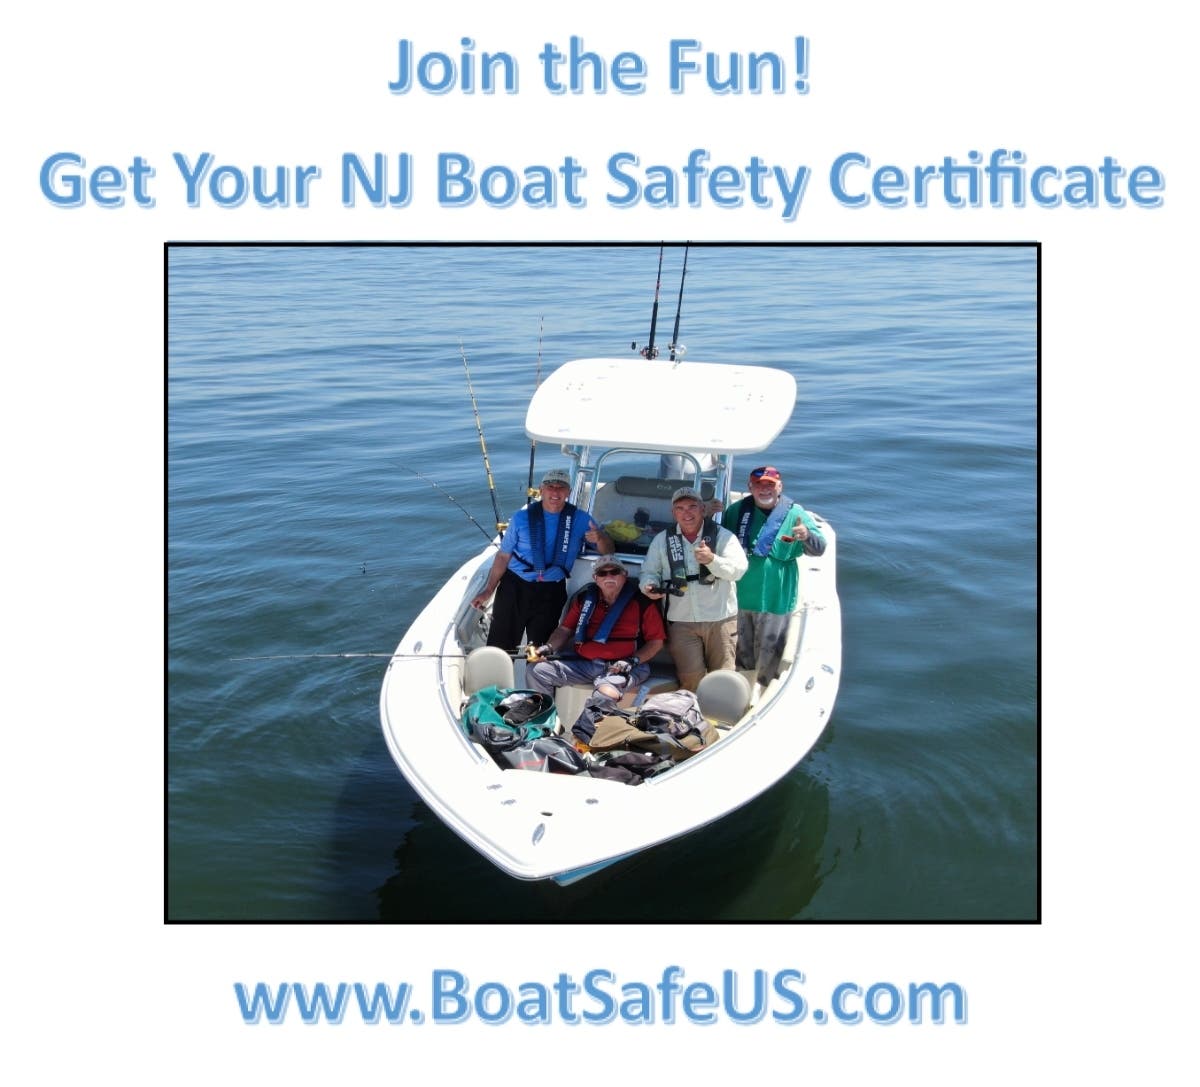 NJ Boat Safety Certificate & NJ Boat License – What’s the Difference?